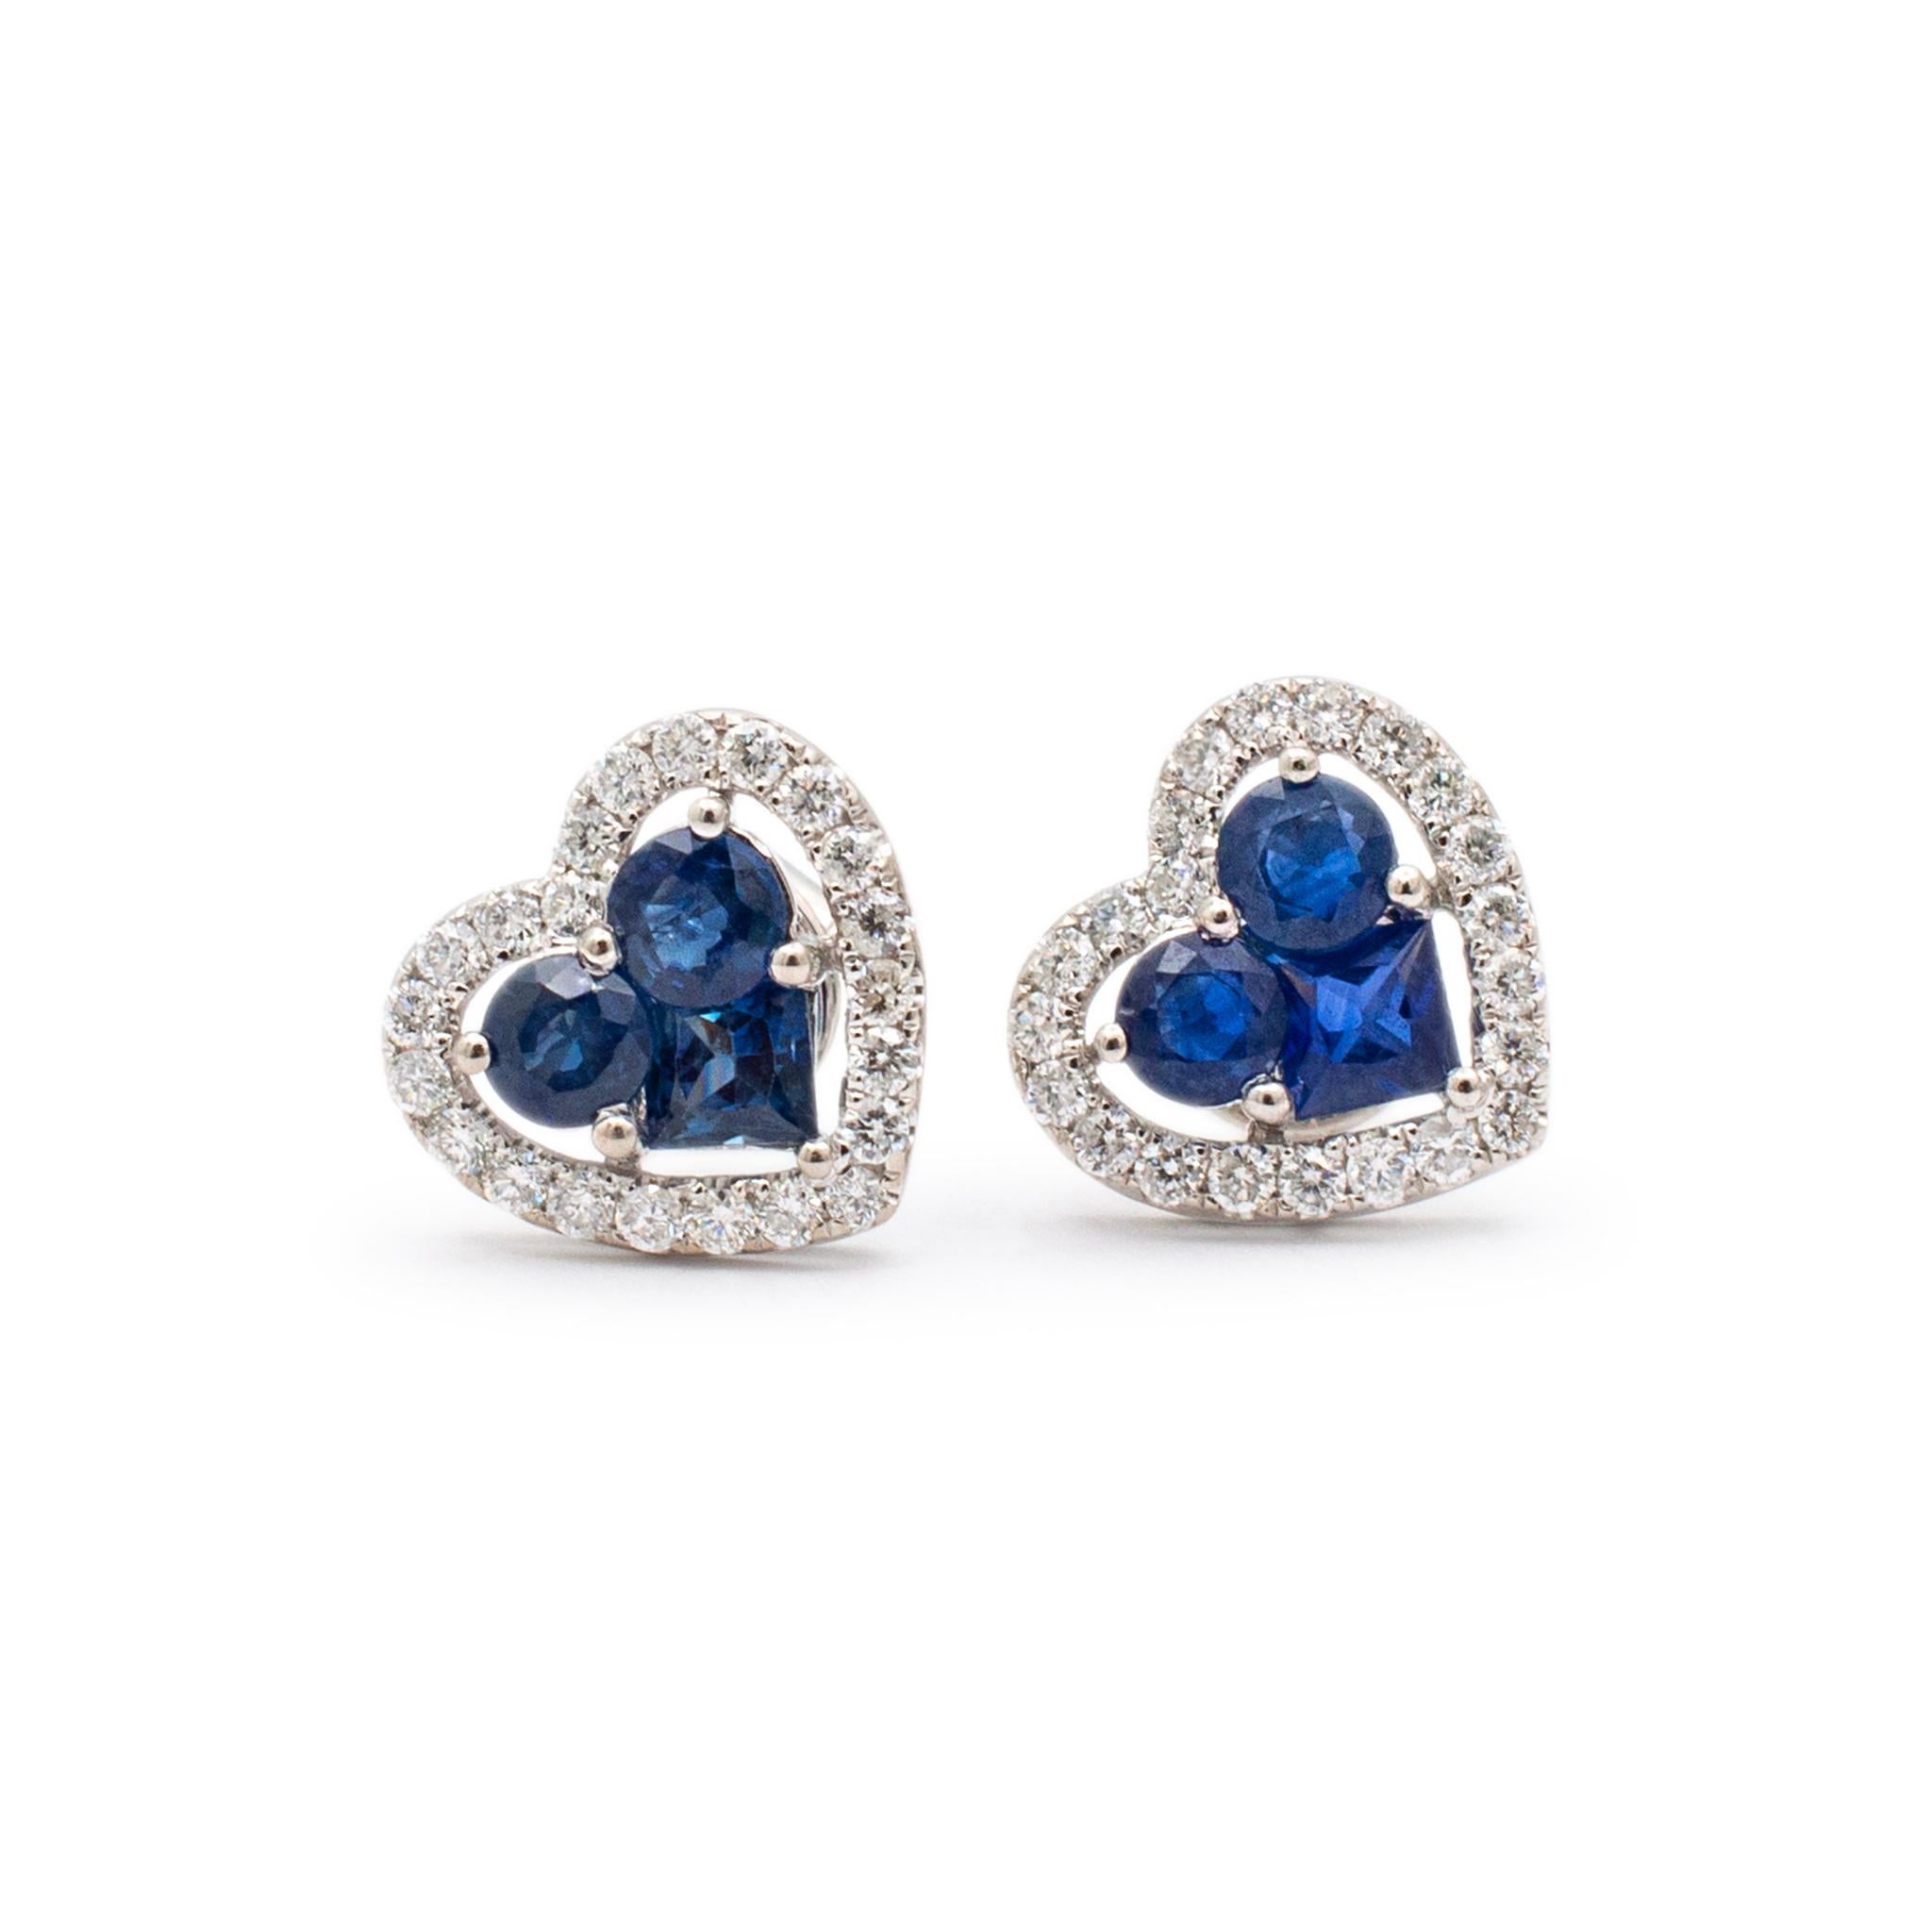 Gender: Ladies

Metal Type: 18K White Gold

Length: 0.50 Inches

Width: 12.75 mm

Weight: 4.30 grams
Ladies 18K white gold sapphire and diamond contemporary-style stud earrings with push backs. Engraved with 